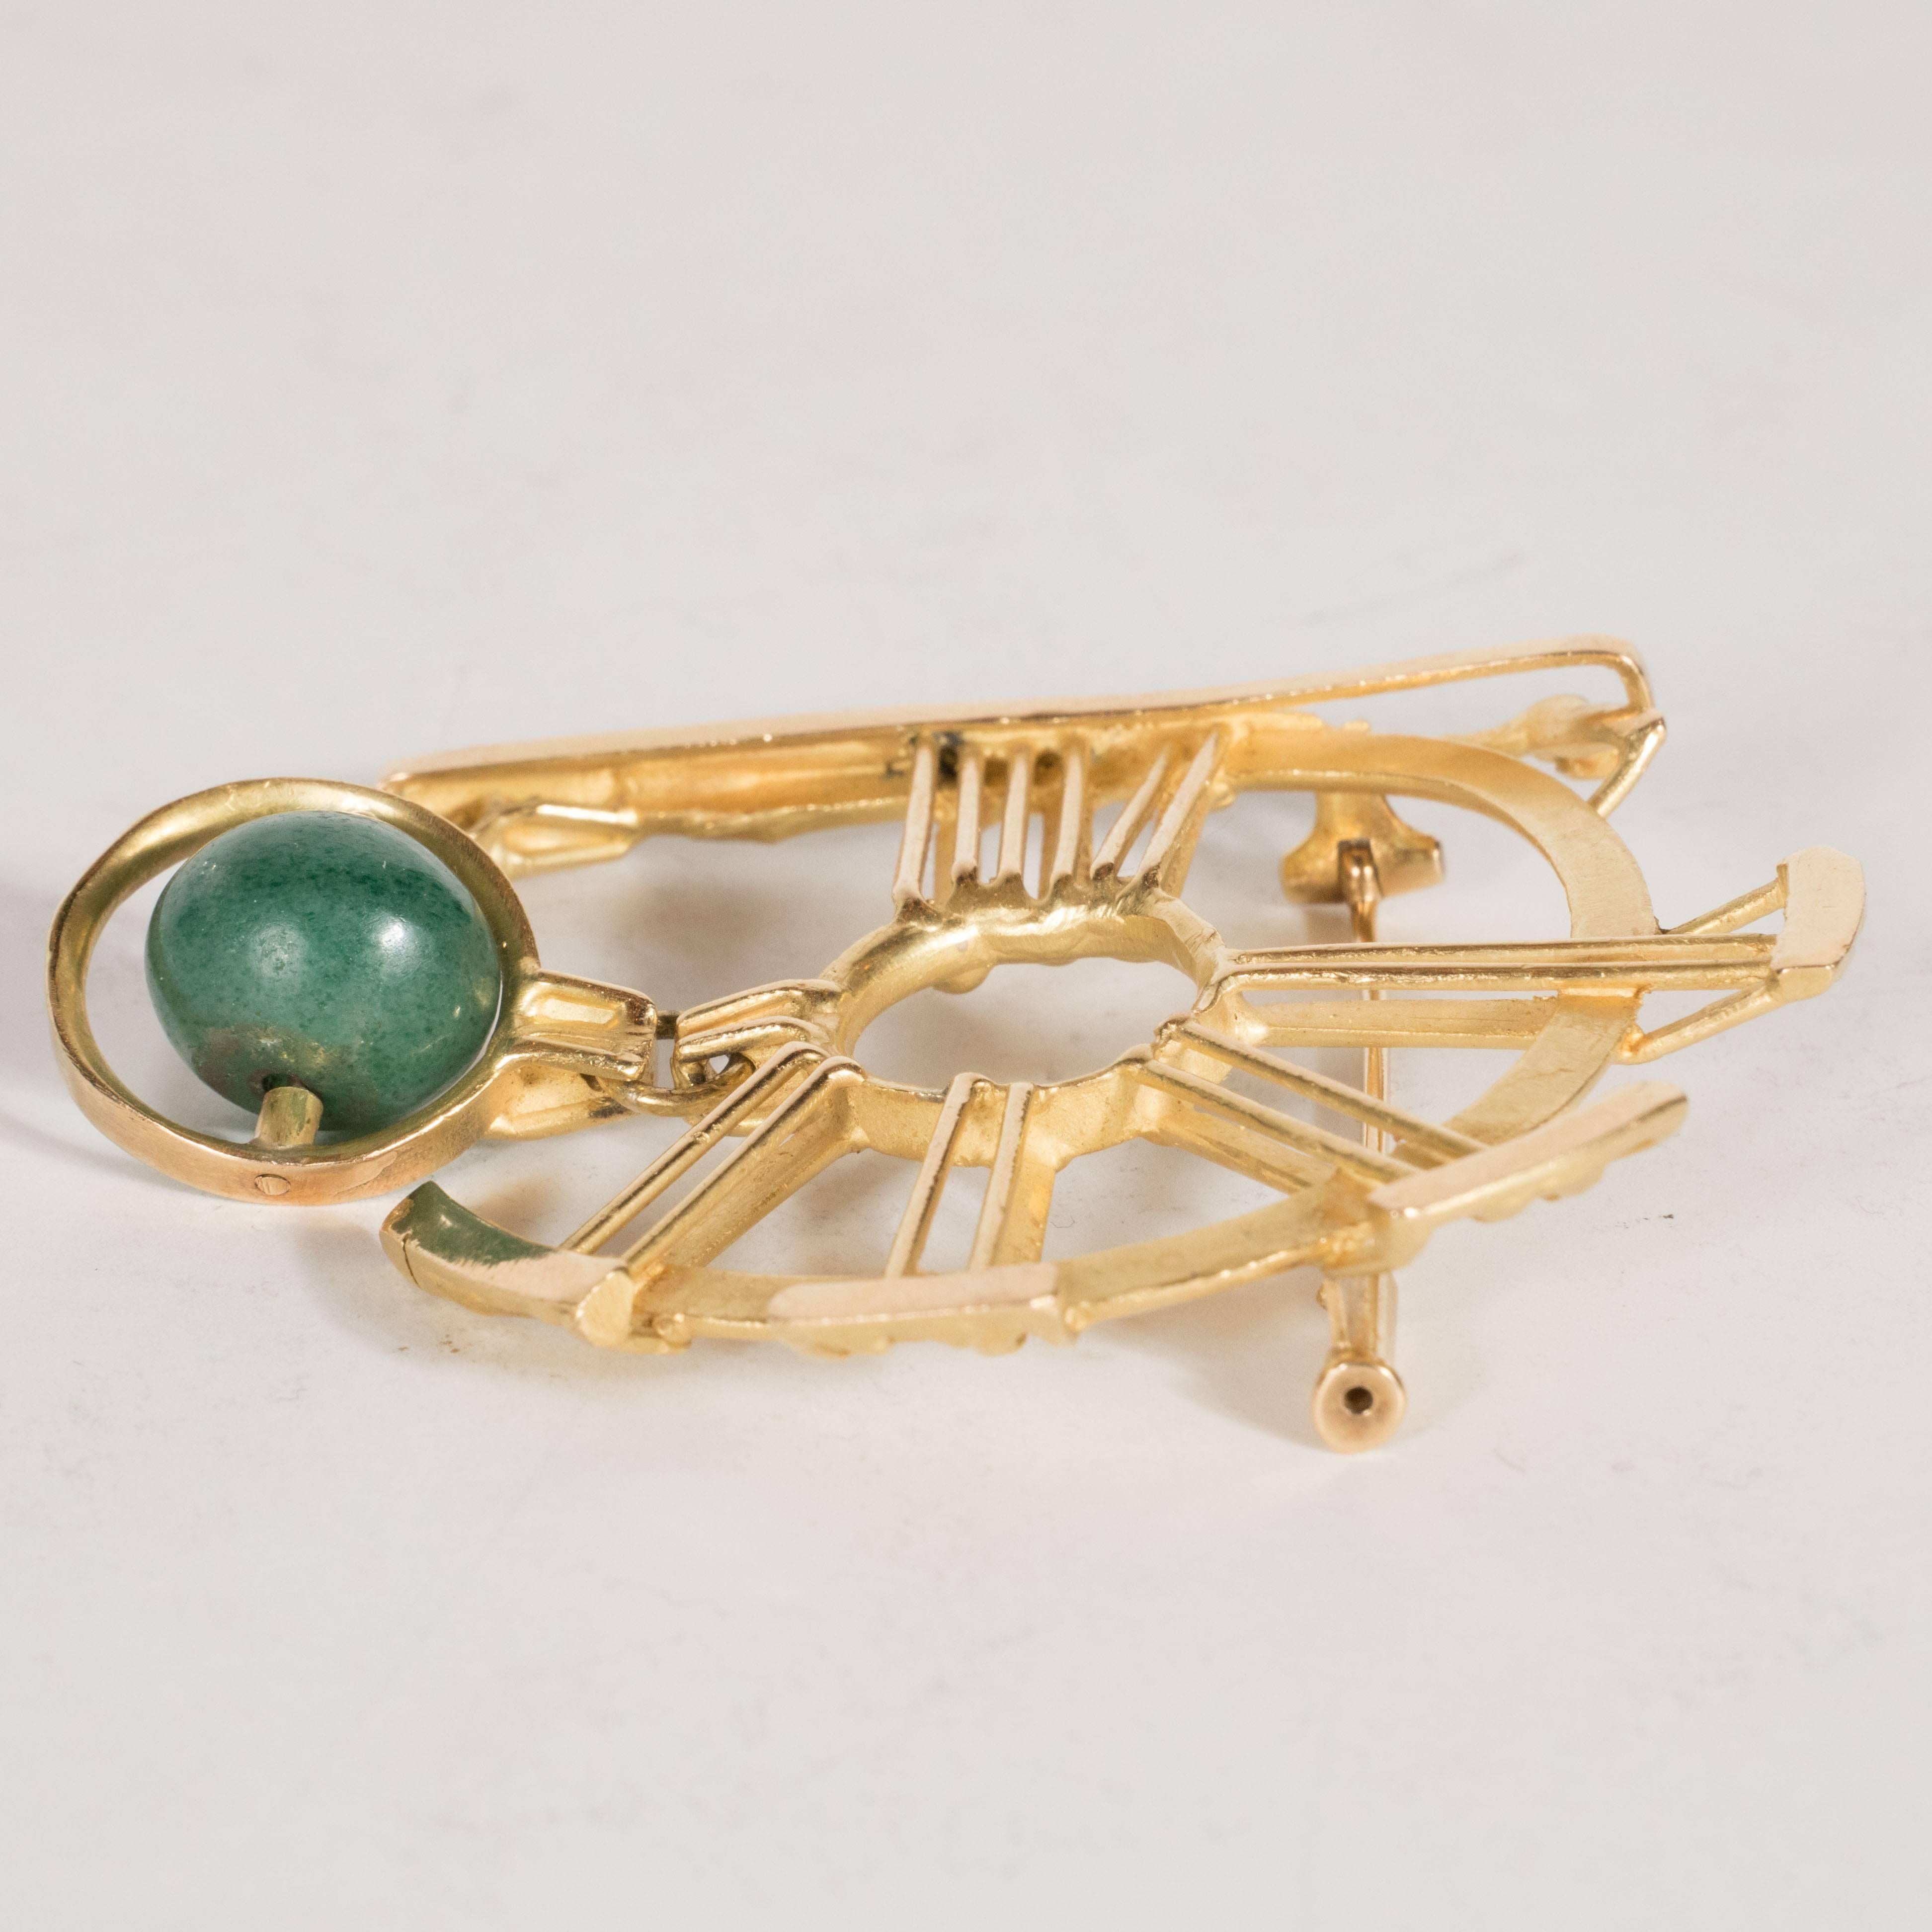 This dynamic geometric brooch features vertical stokes in 18 karat yellow gold emanating from a central circular form. A serpentine jade wheel on a horizontal axis hangs from one of these stokes, encompassed by a circle that echoes the central form.